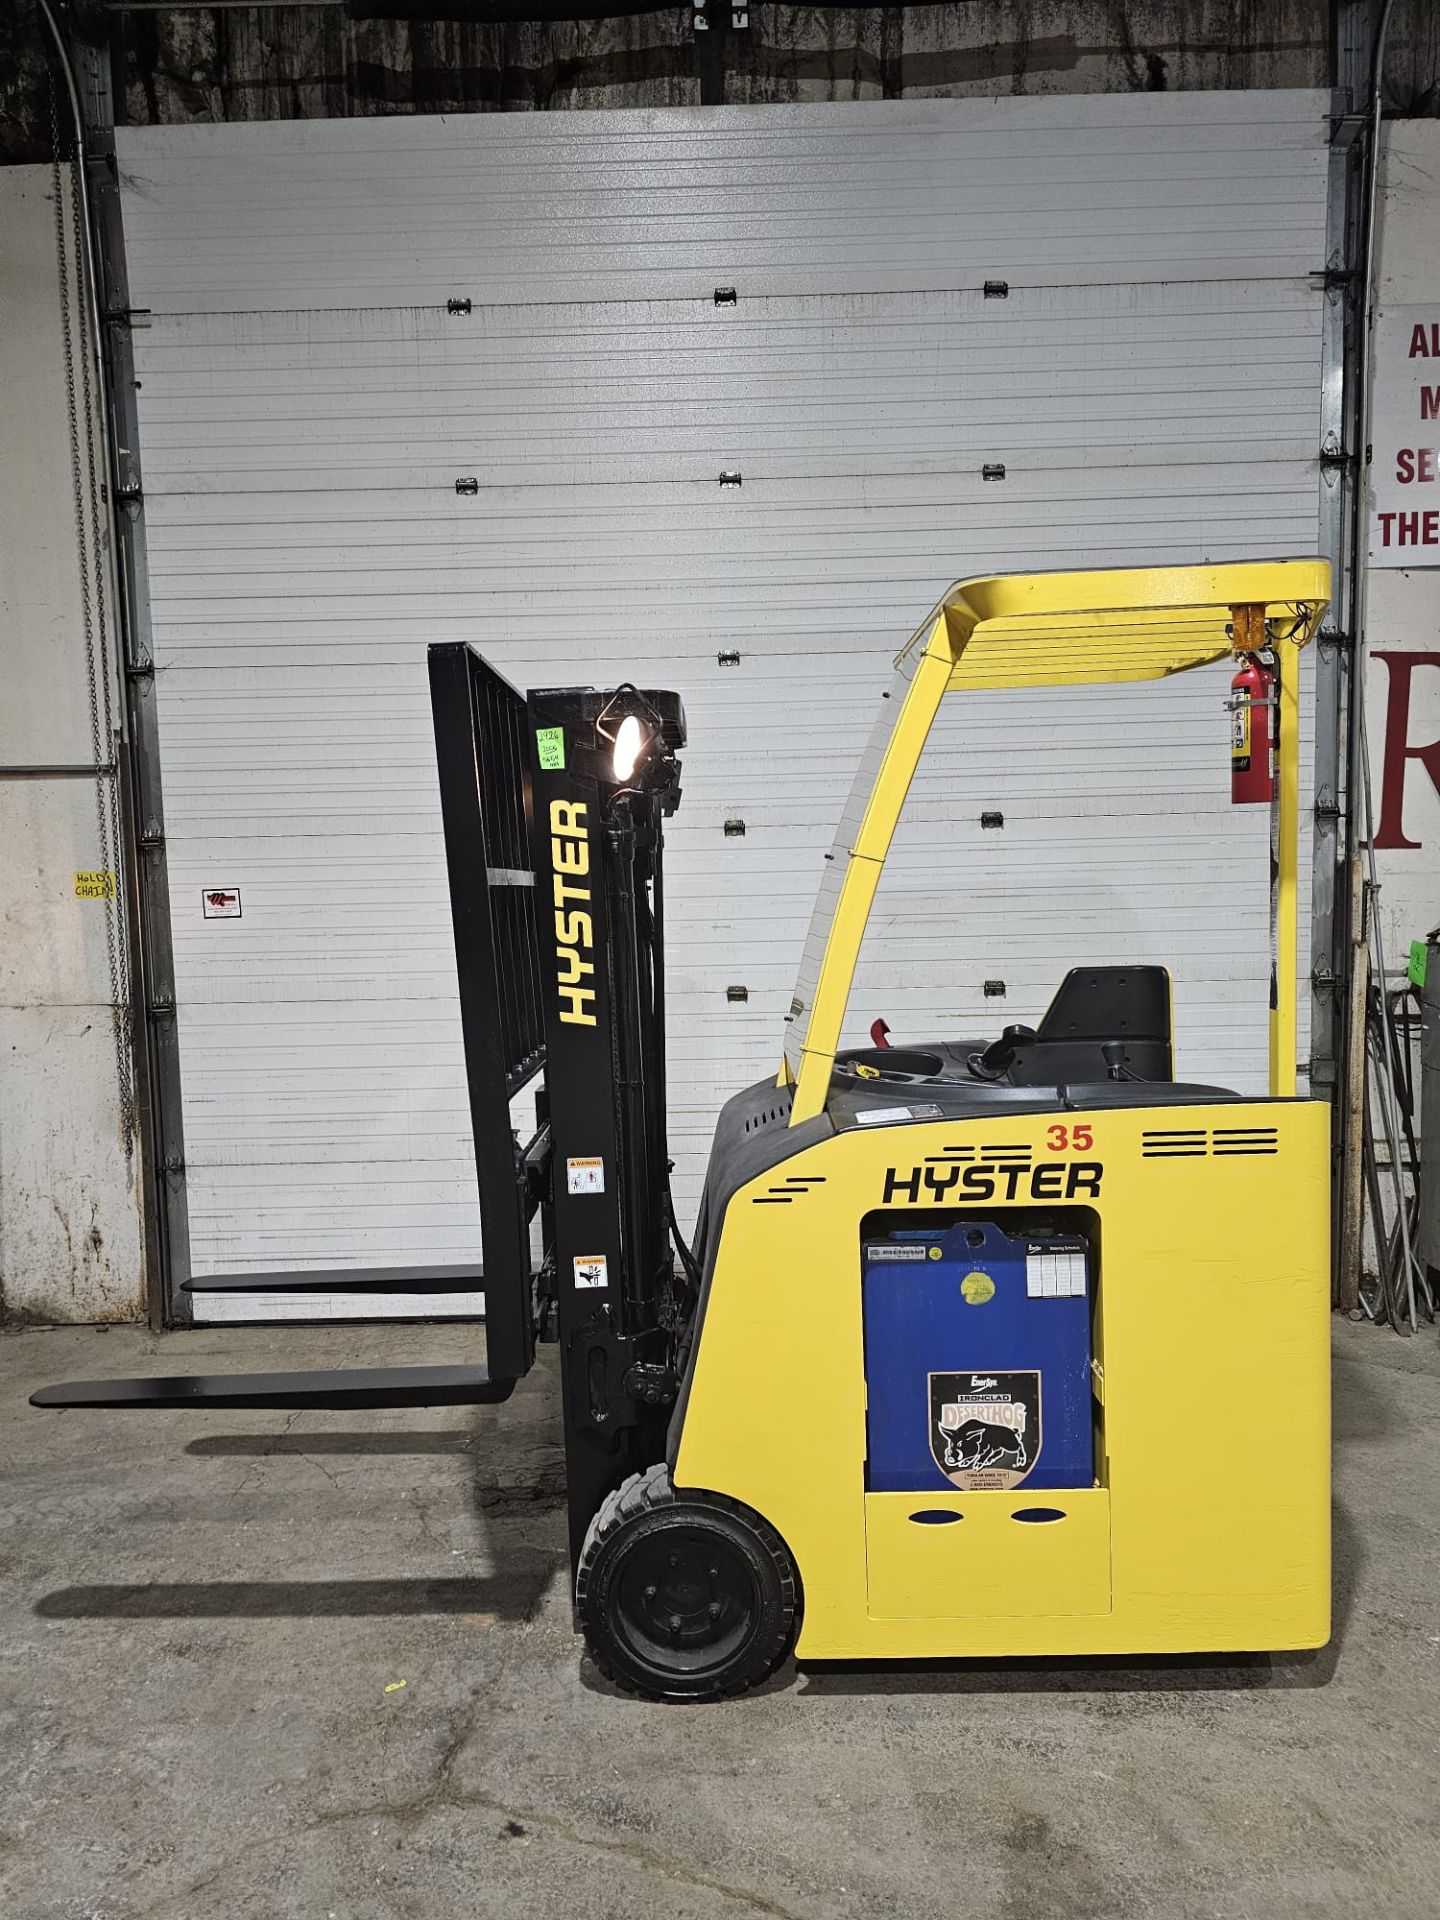 2006 Hyster 3,500lbs Capacity Electric Stand On Forklift 3-STAGE MAST 36V with sideshift & Tires